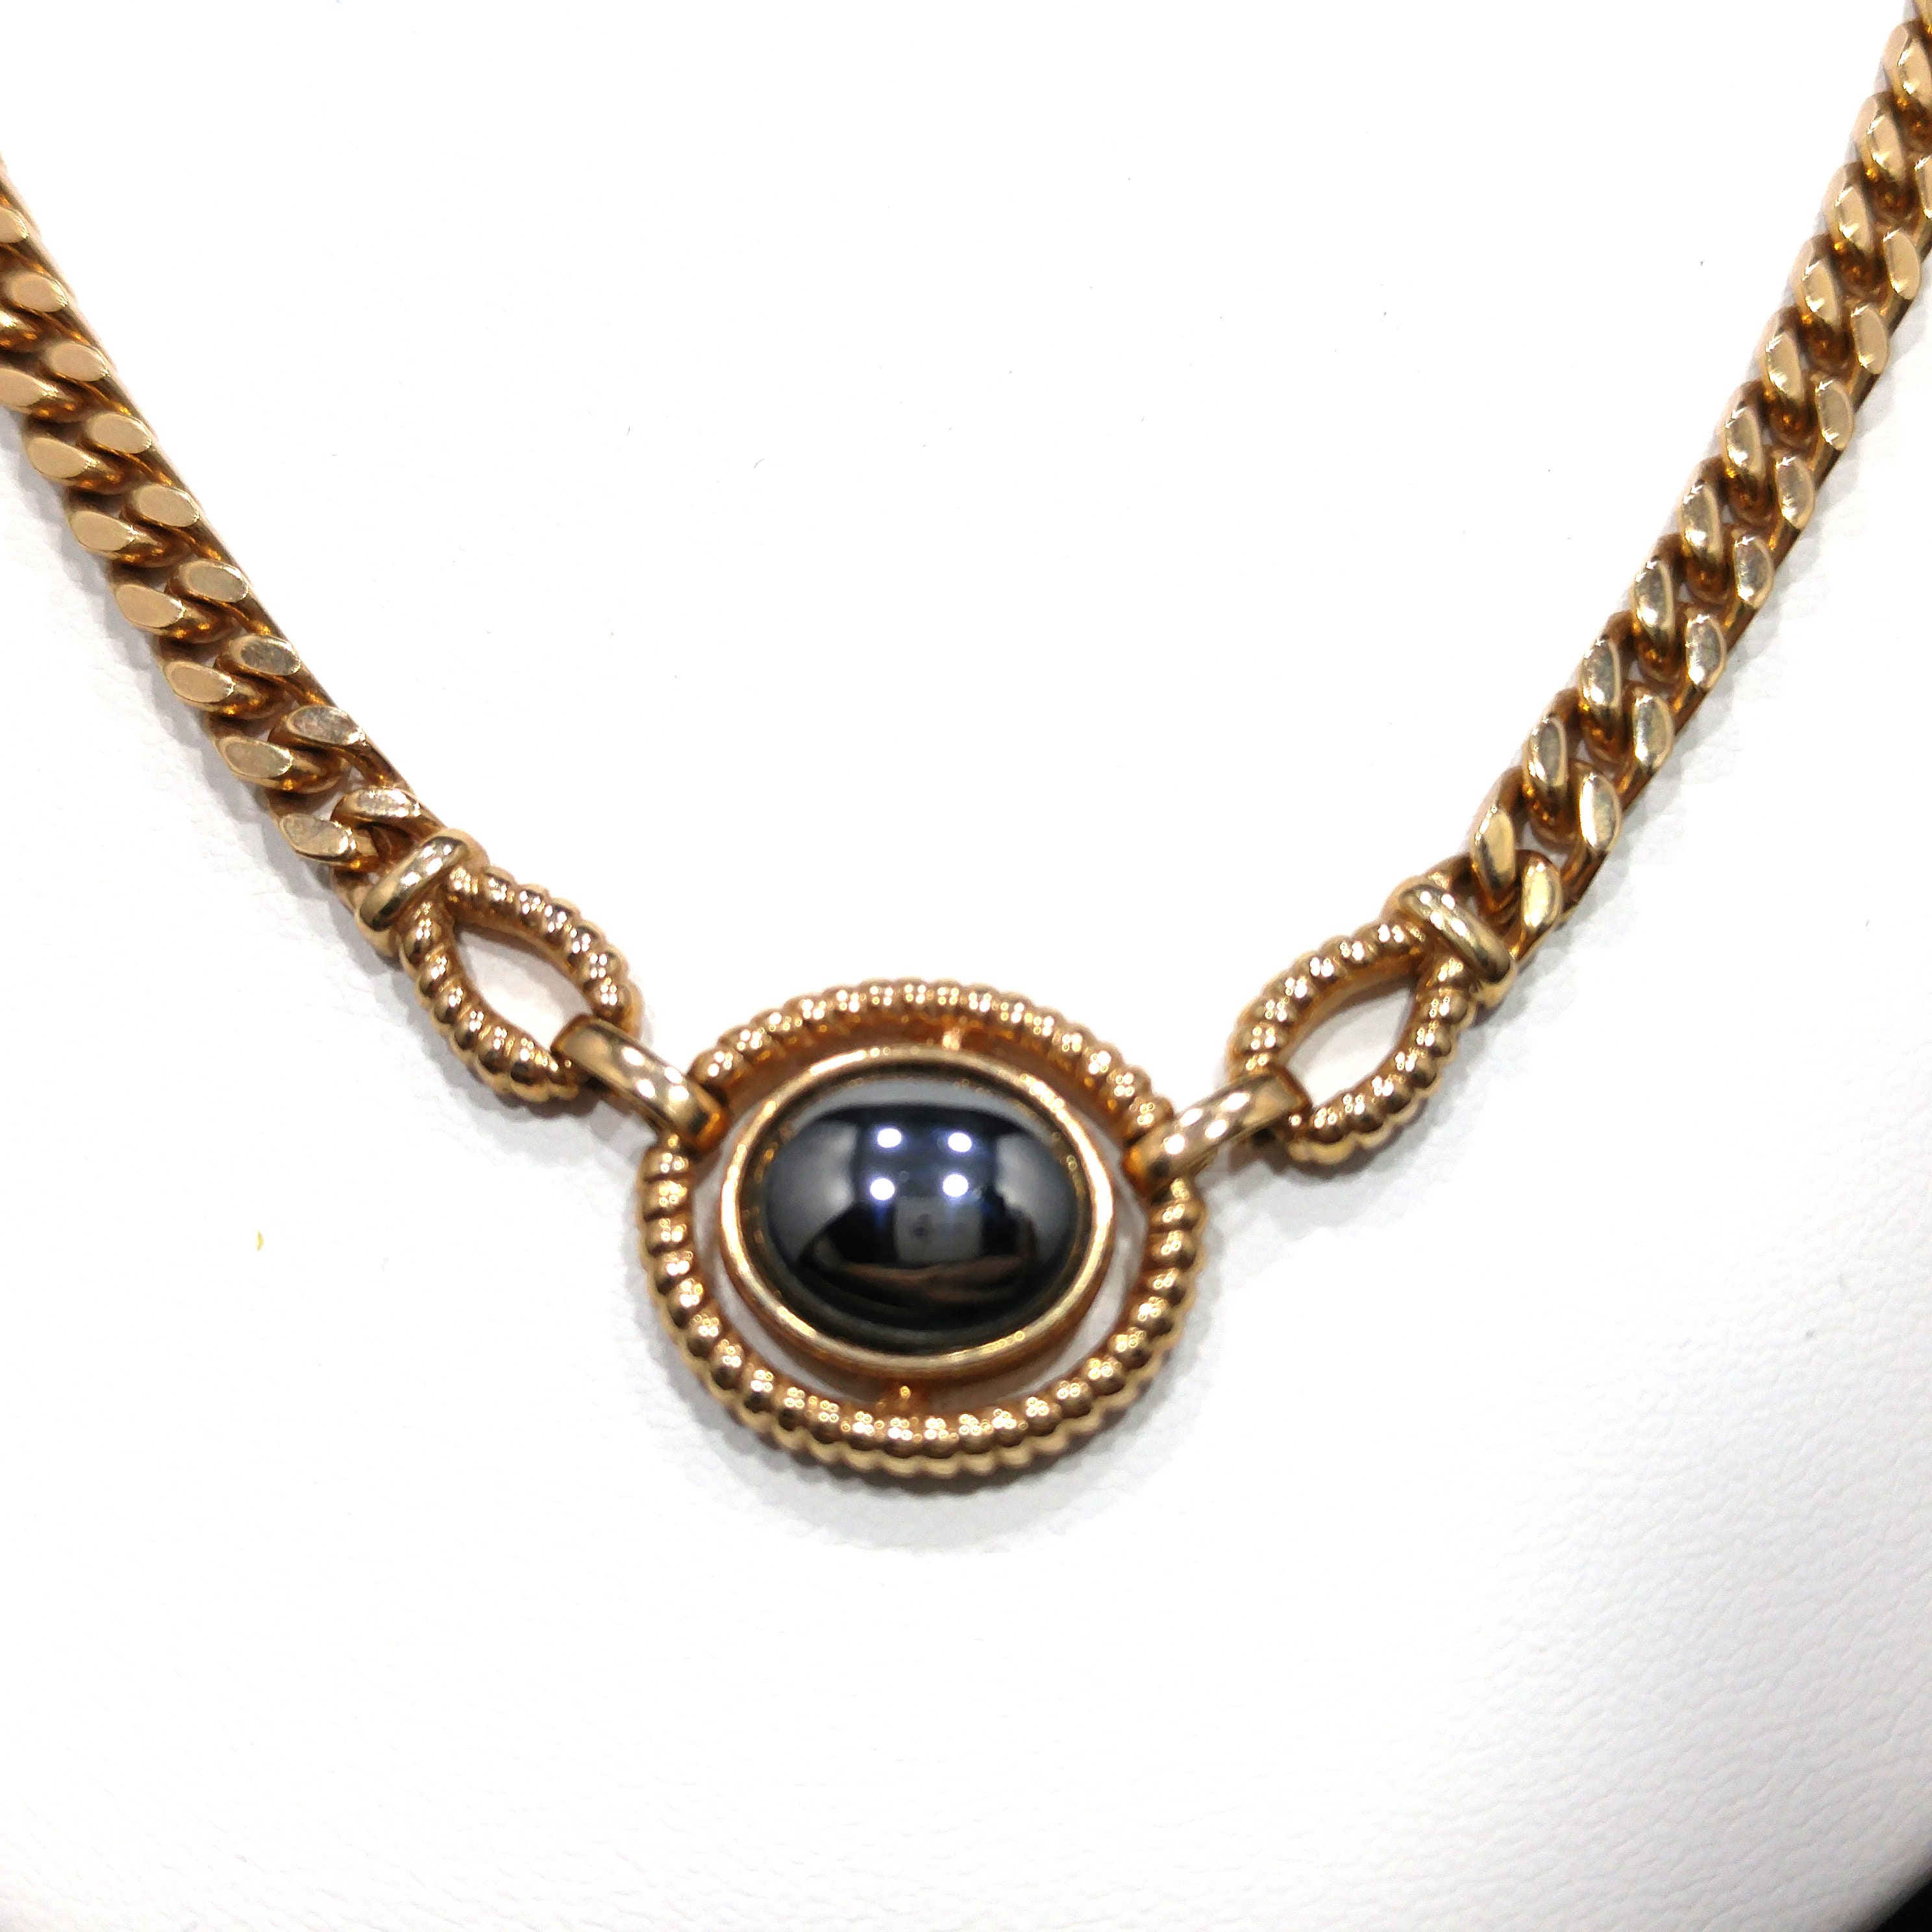 Louis Feraud Vintage Gold Chain Link Necklace w Black Pearlized